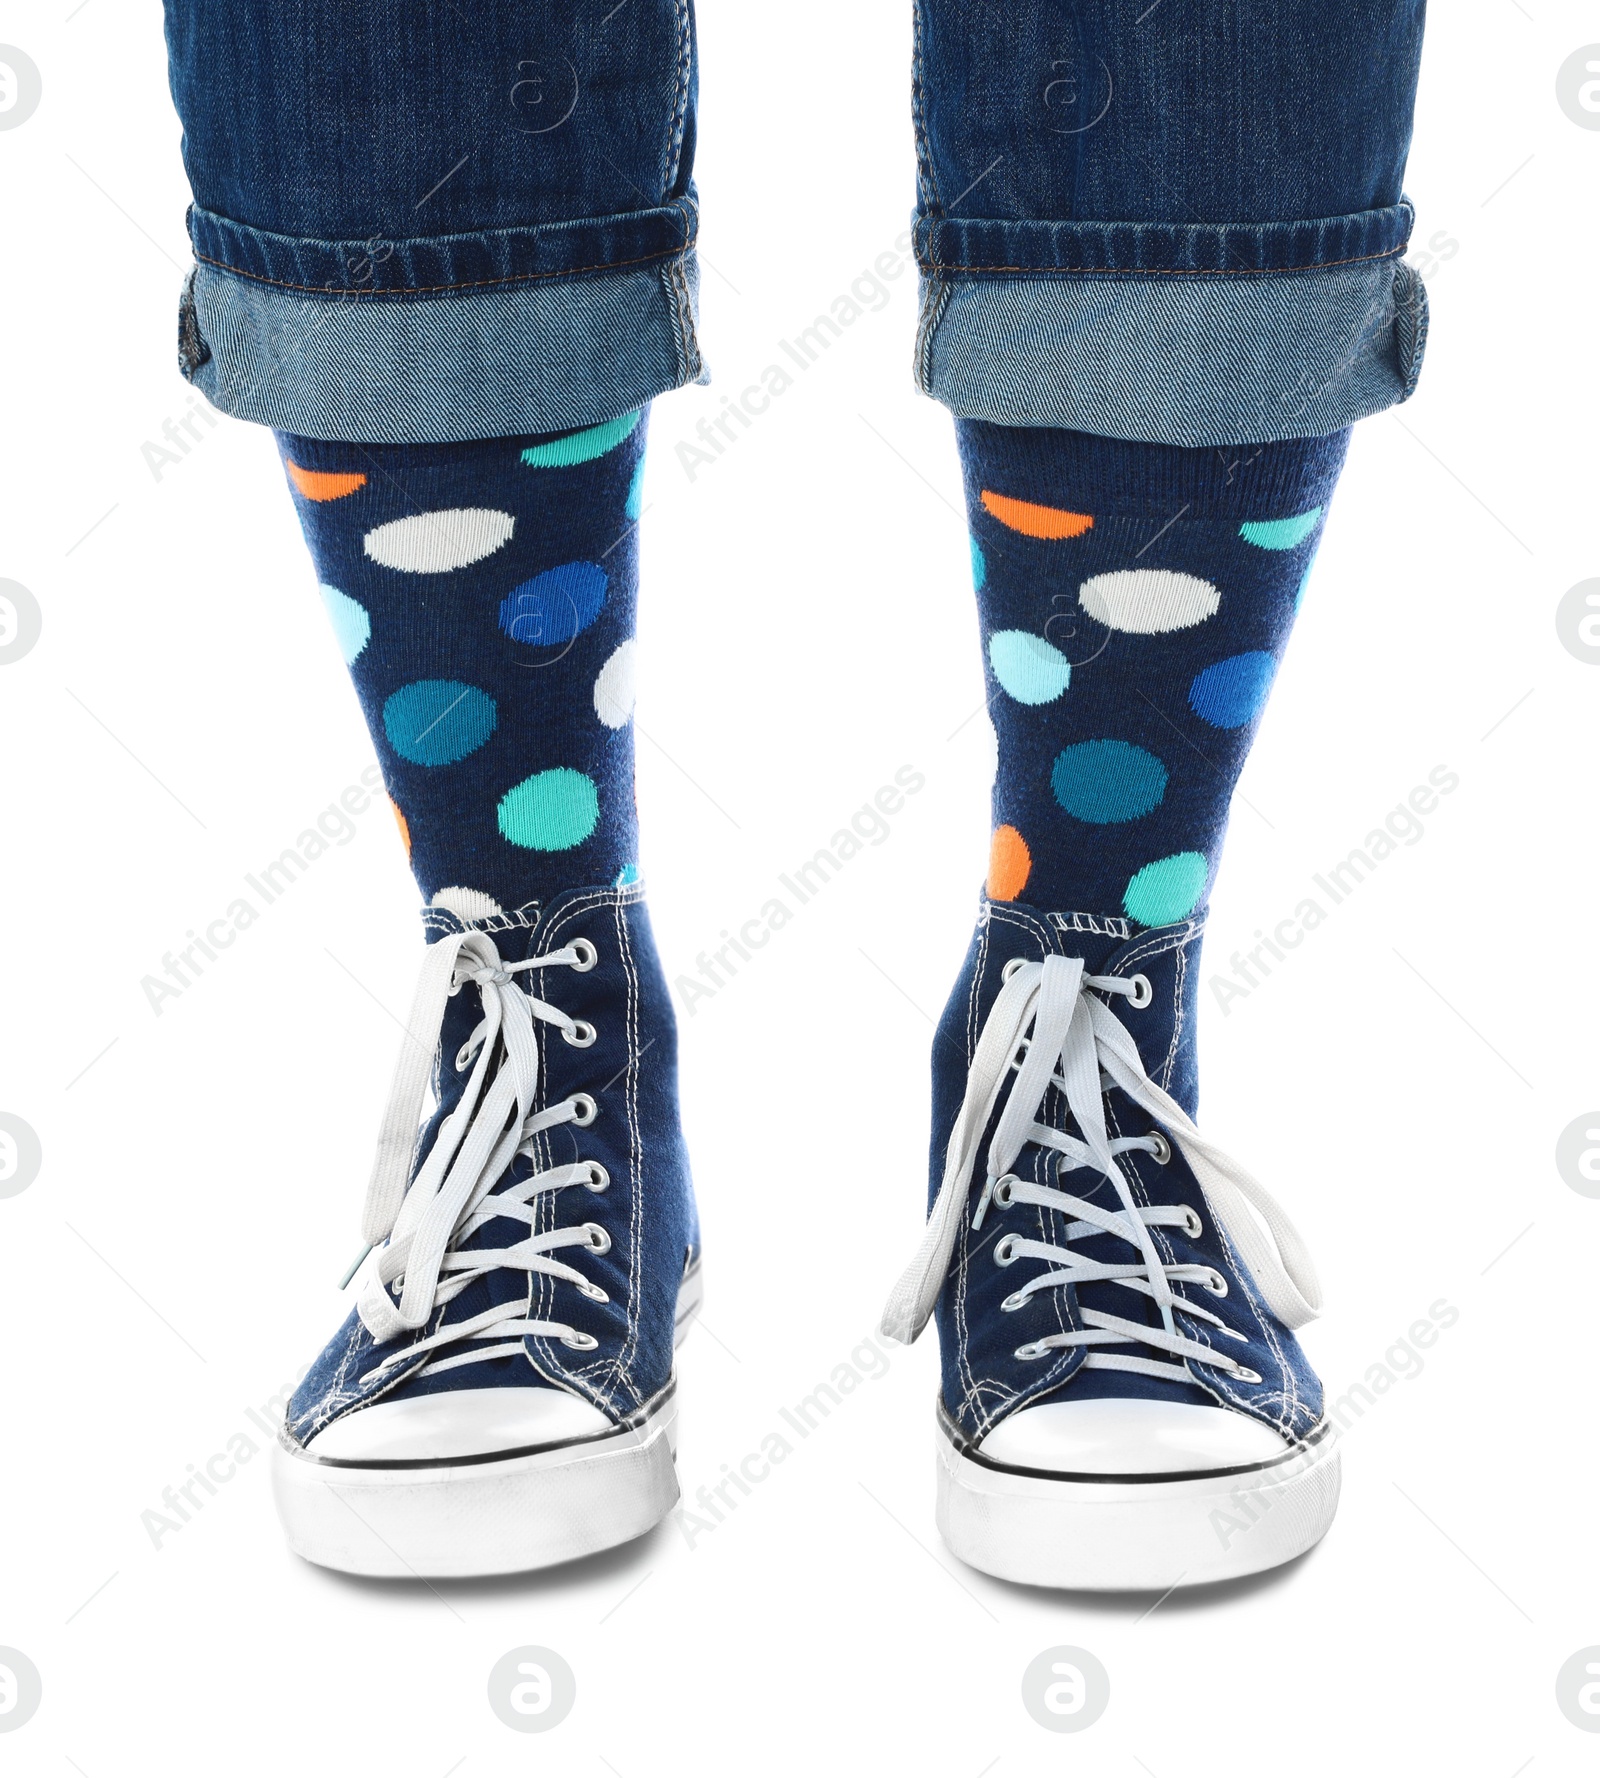 Photo of Person wearing stylish socks and shoes on white background, closeup